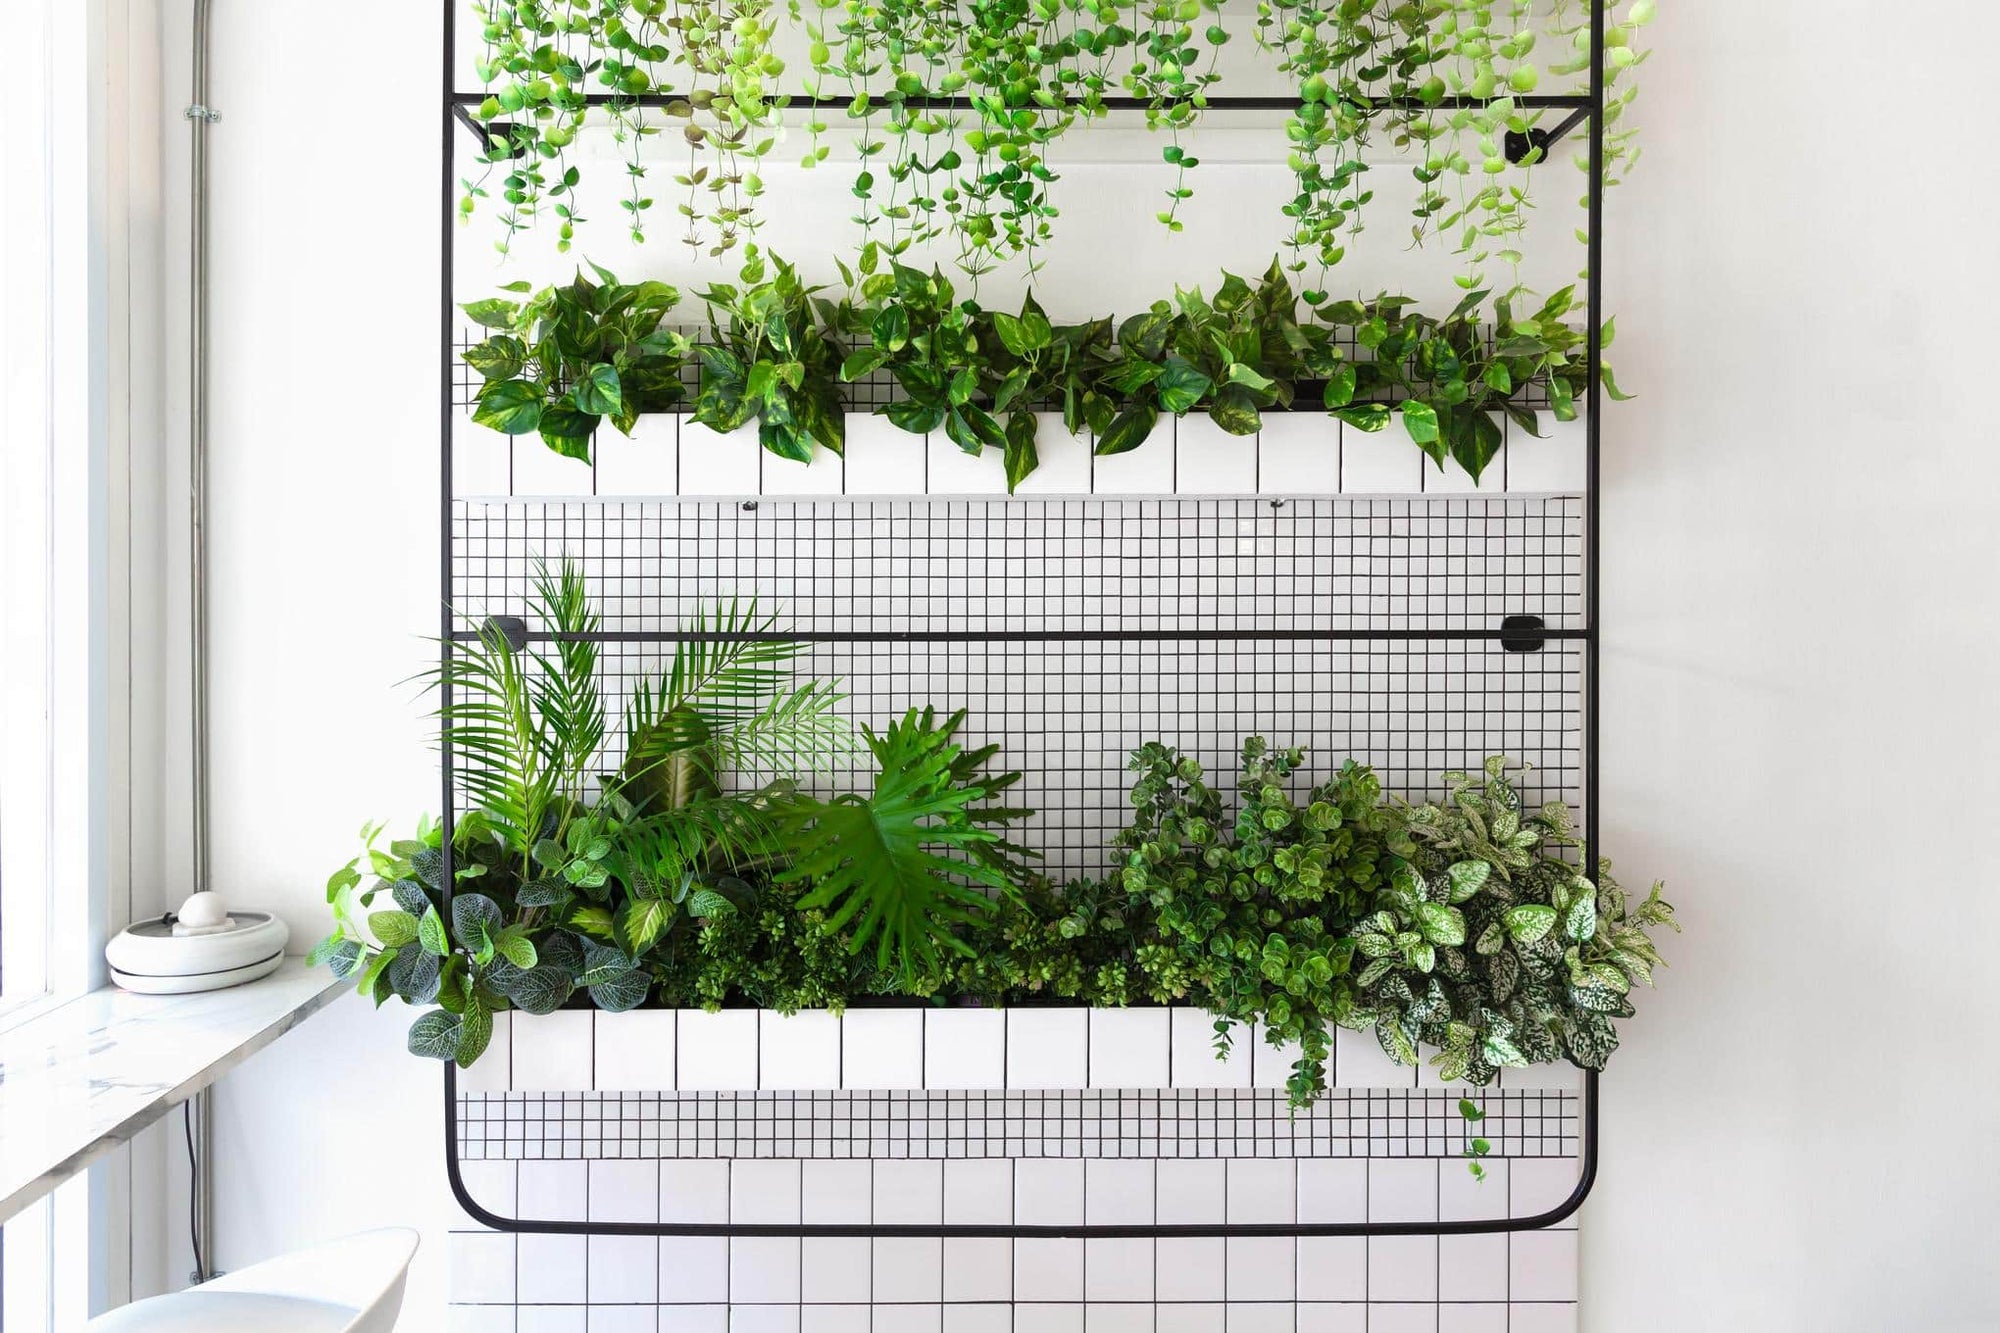 What Are Vertical Gardens?